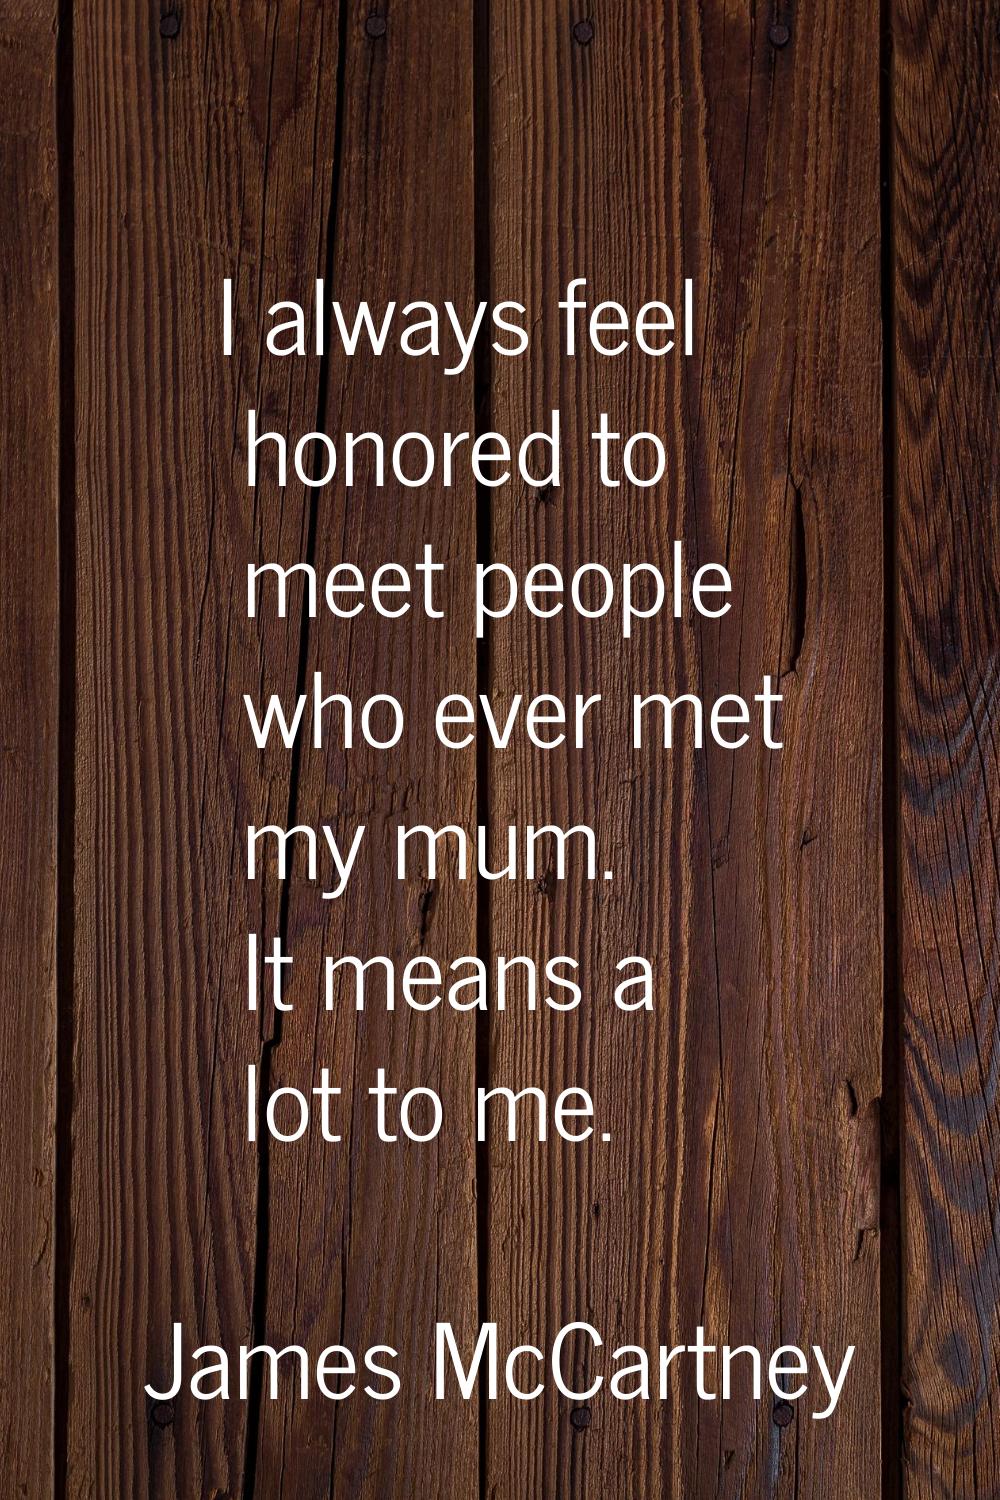 I always feel honored to meet people who ever met my mum. It means a lot to me.